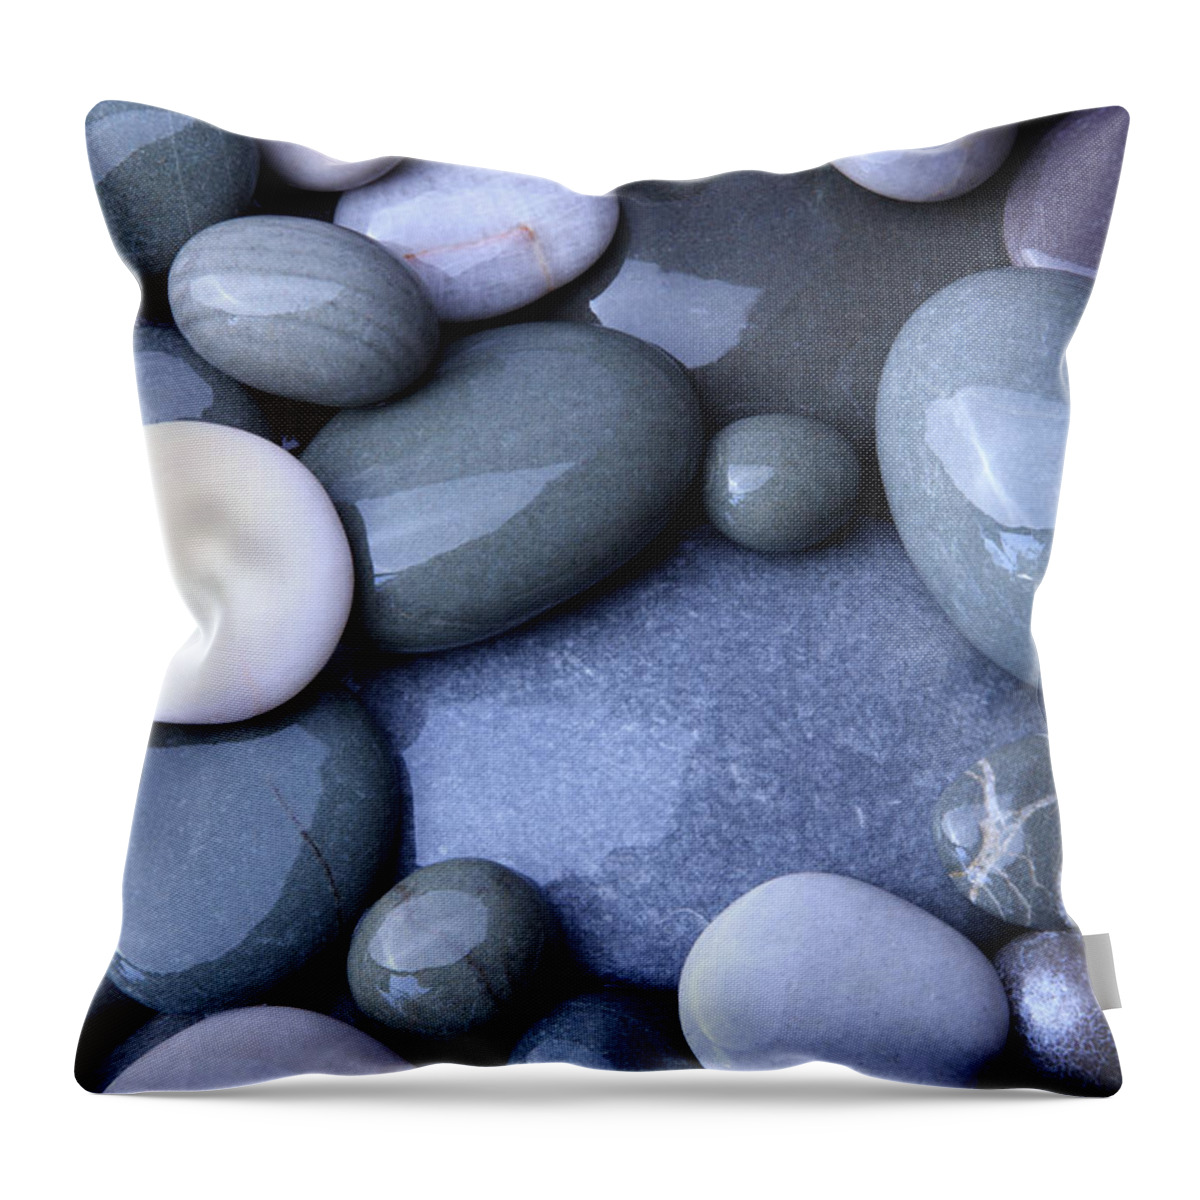 Large Group Of Objects Throw Pillow featuring the photograph Wet Granite Pebbles On Beach by Rosemary Calvert